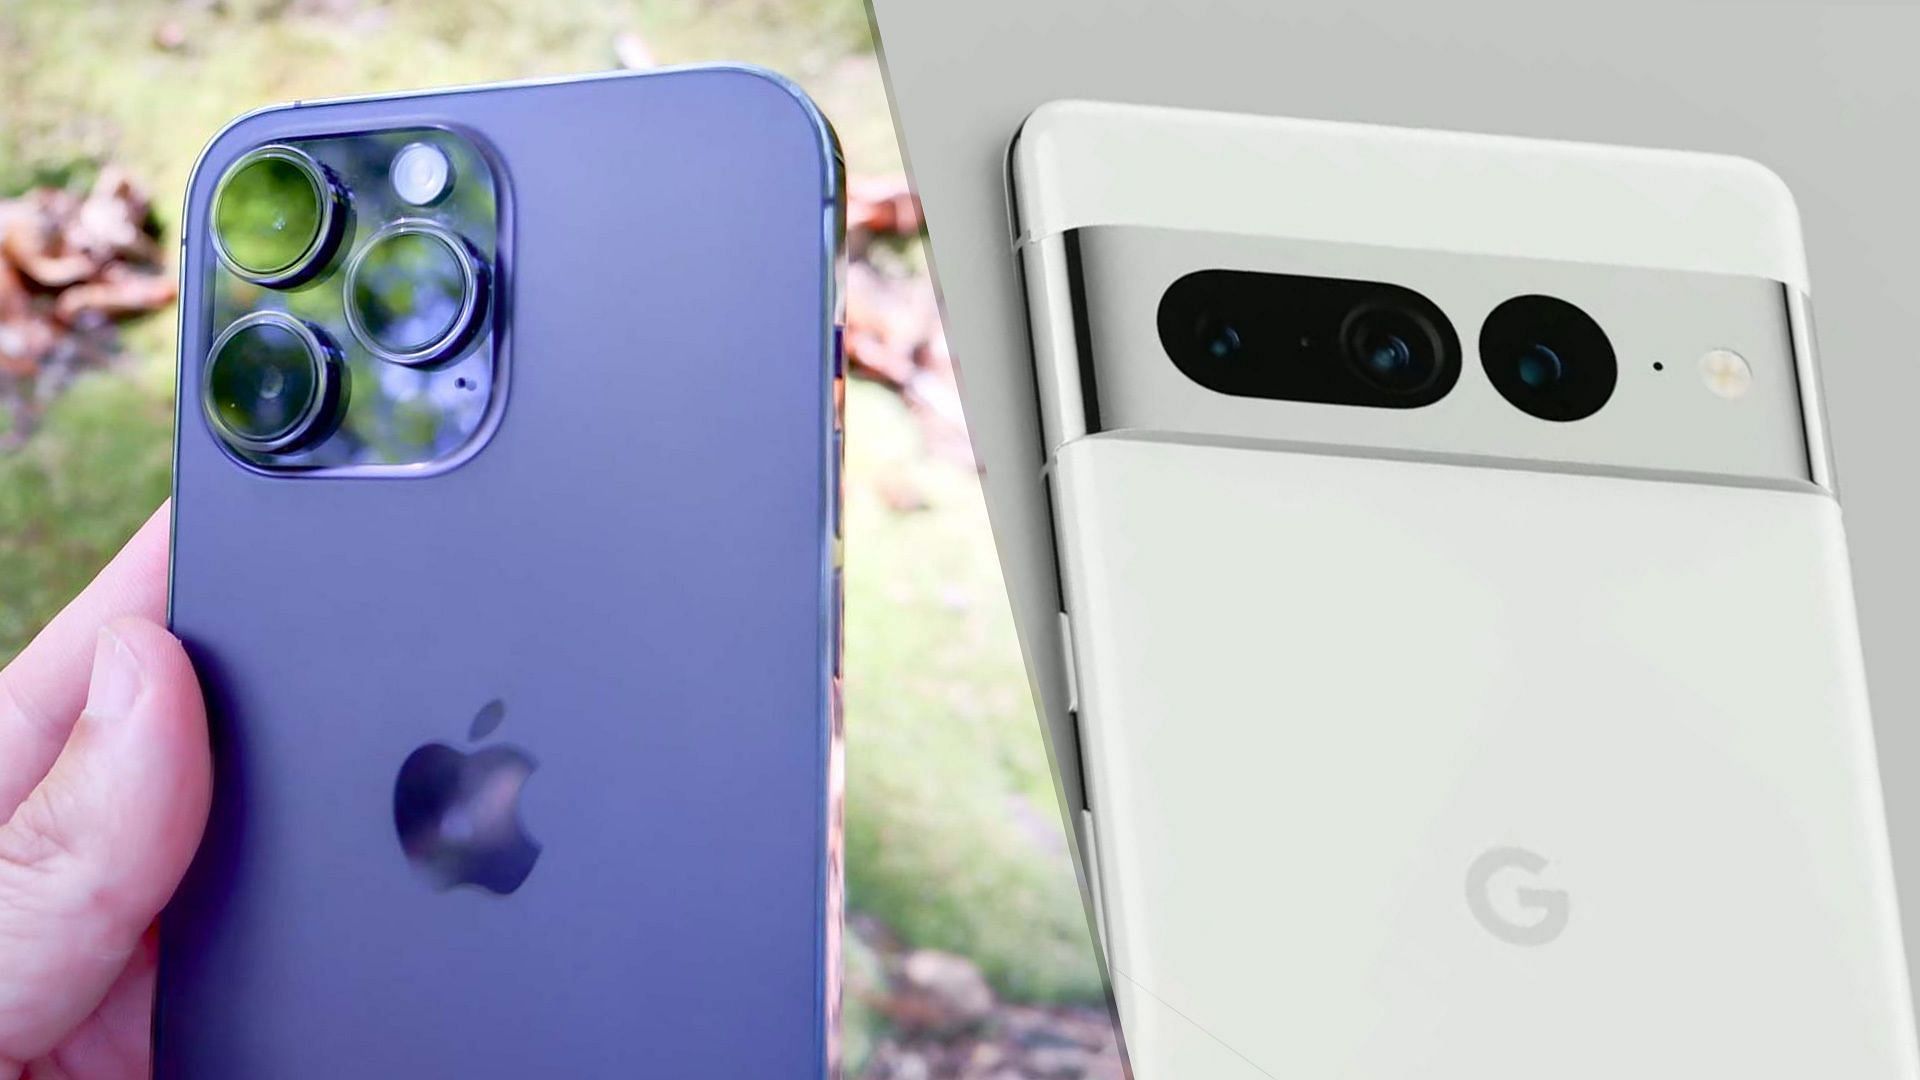 iPhone 14 Pro vs. Pixel 7 Pro Cameras Tested: Which Takes Better